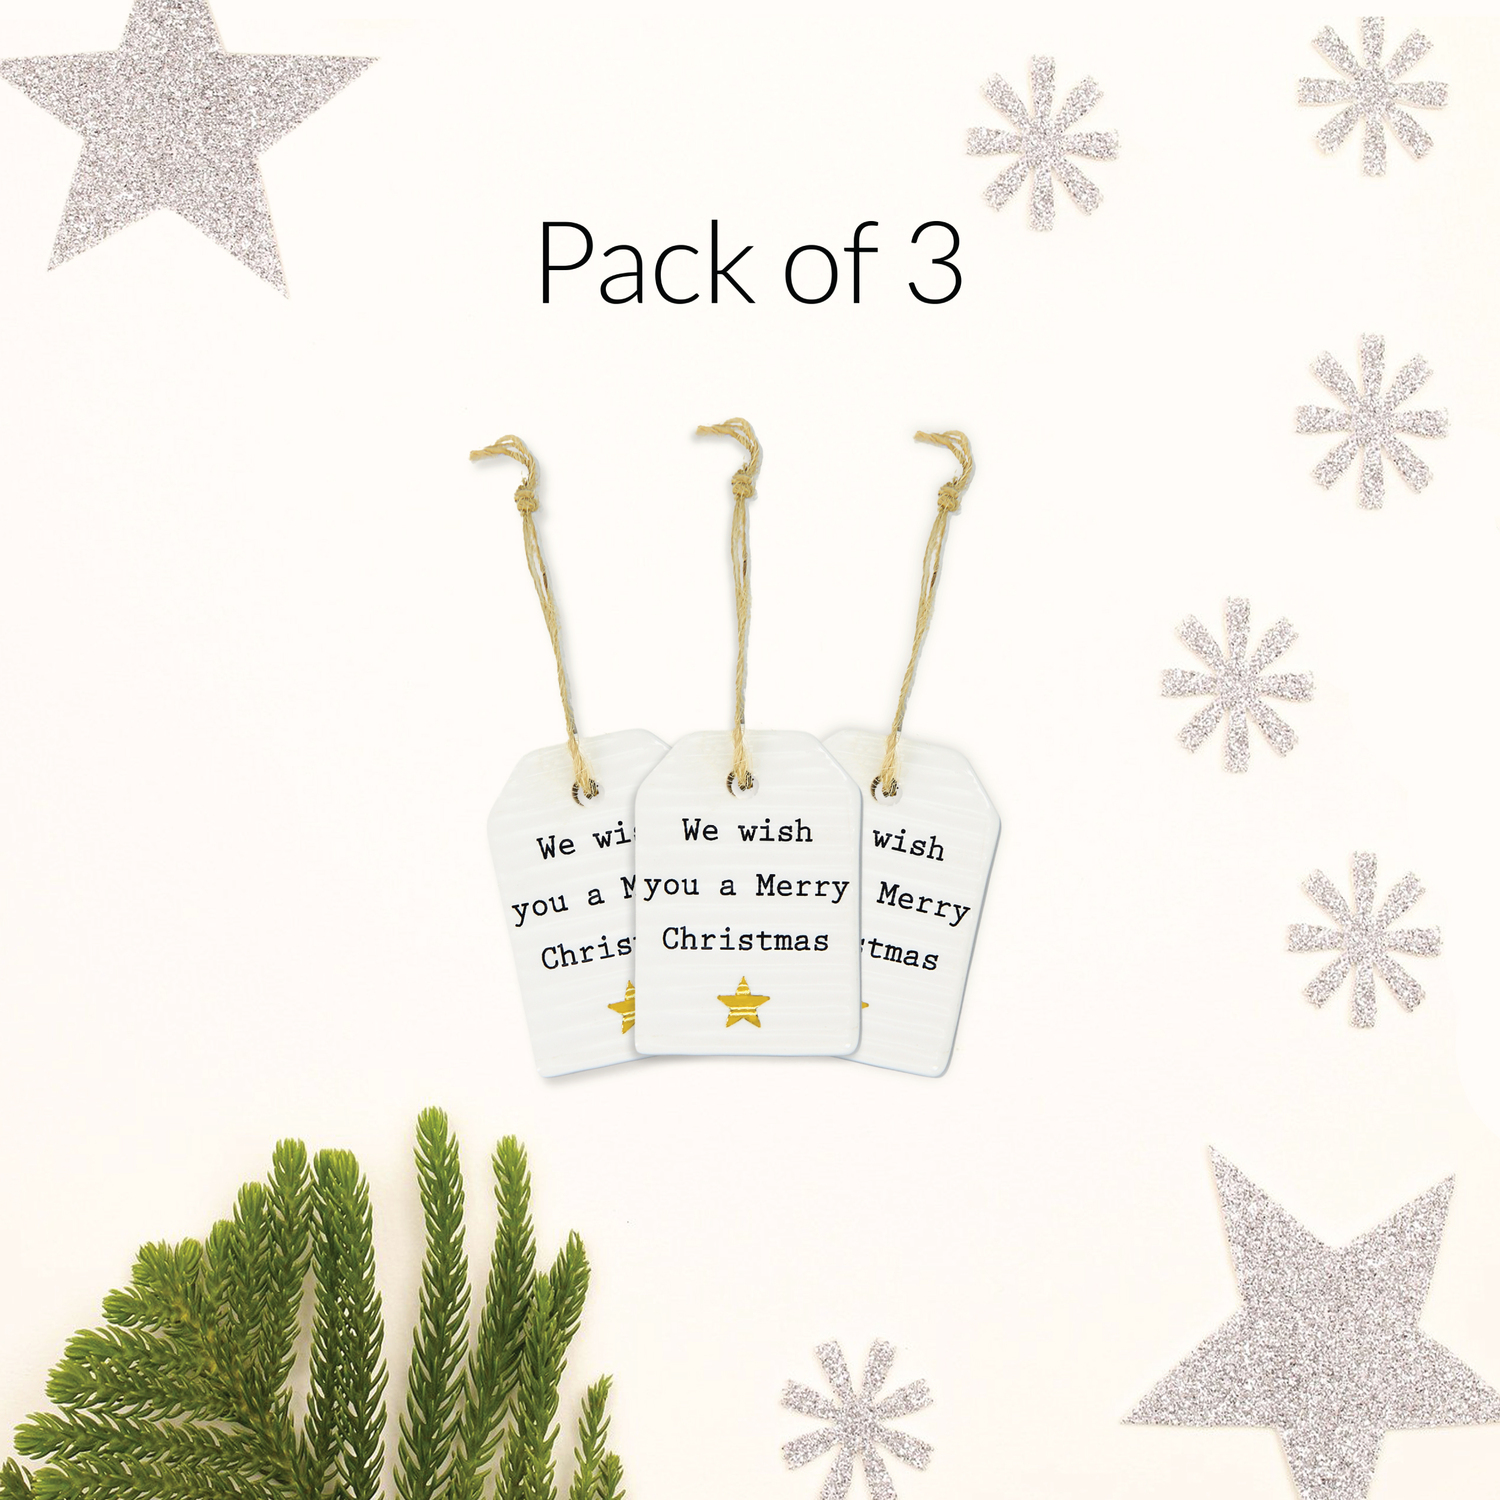 We Wish You by Thoughtful Words - We Wish You - 1.5" Mini Tag
(Set of 3)